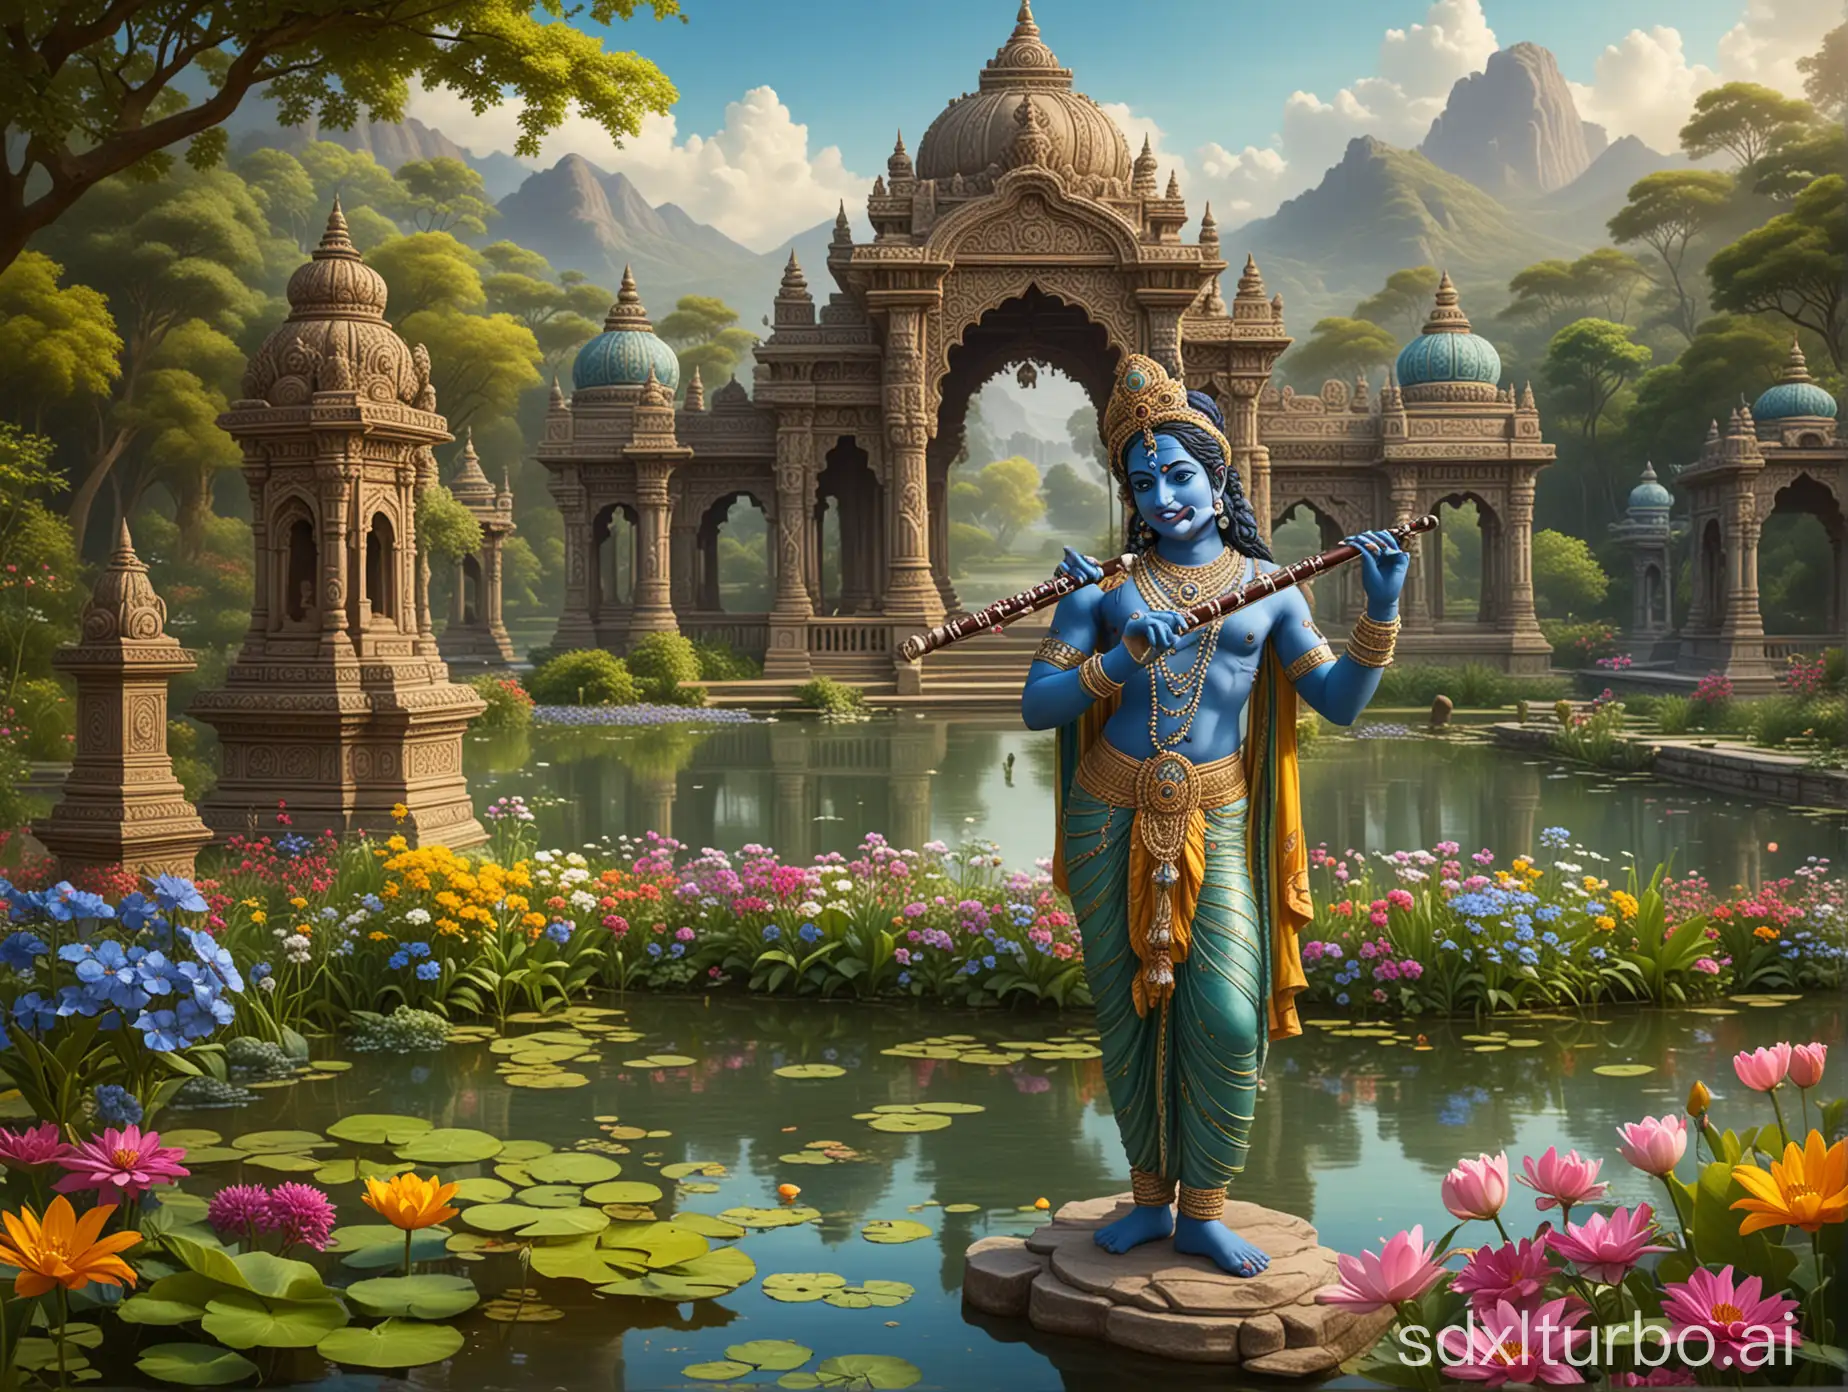 A blue-skinned Hindu deity, likely Krishna, playing a flute in a lush, fantastical landscape with ornate architecture , colorful flowers , and a serene pond, background